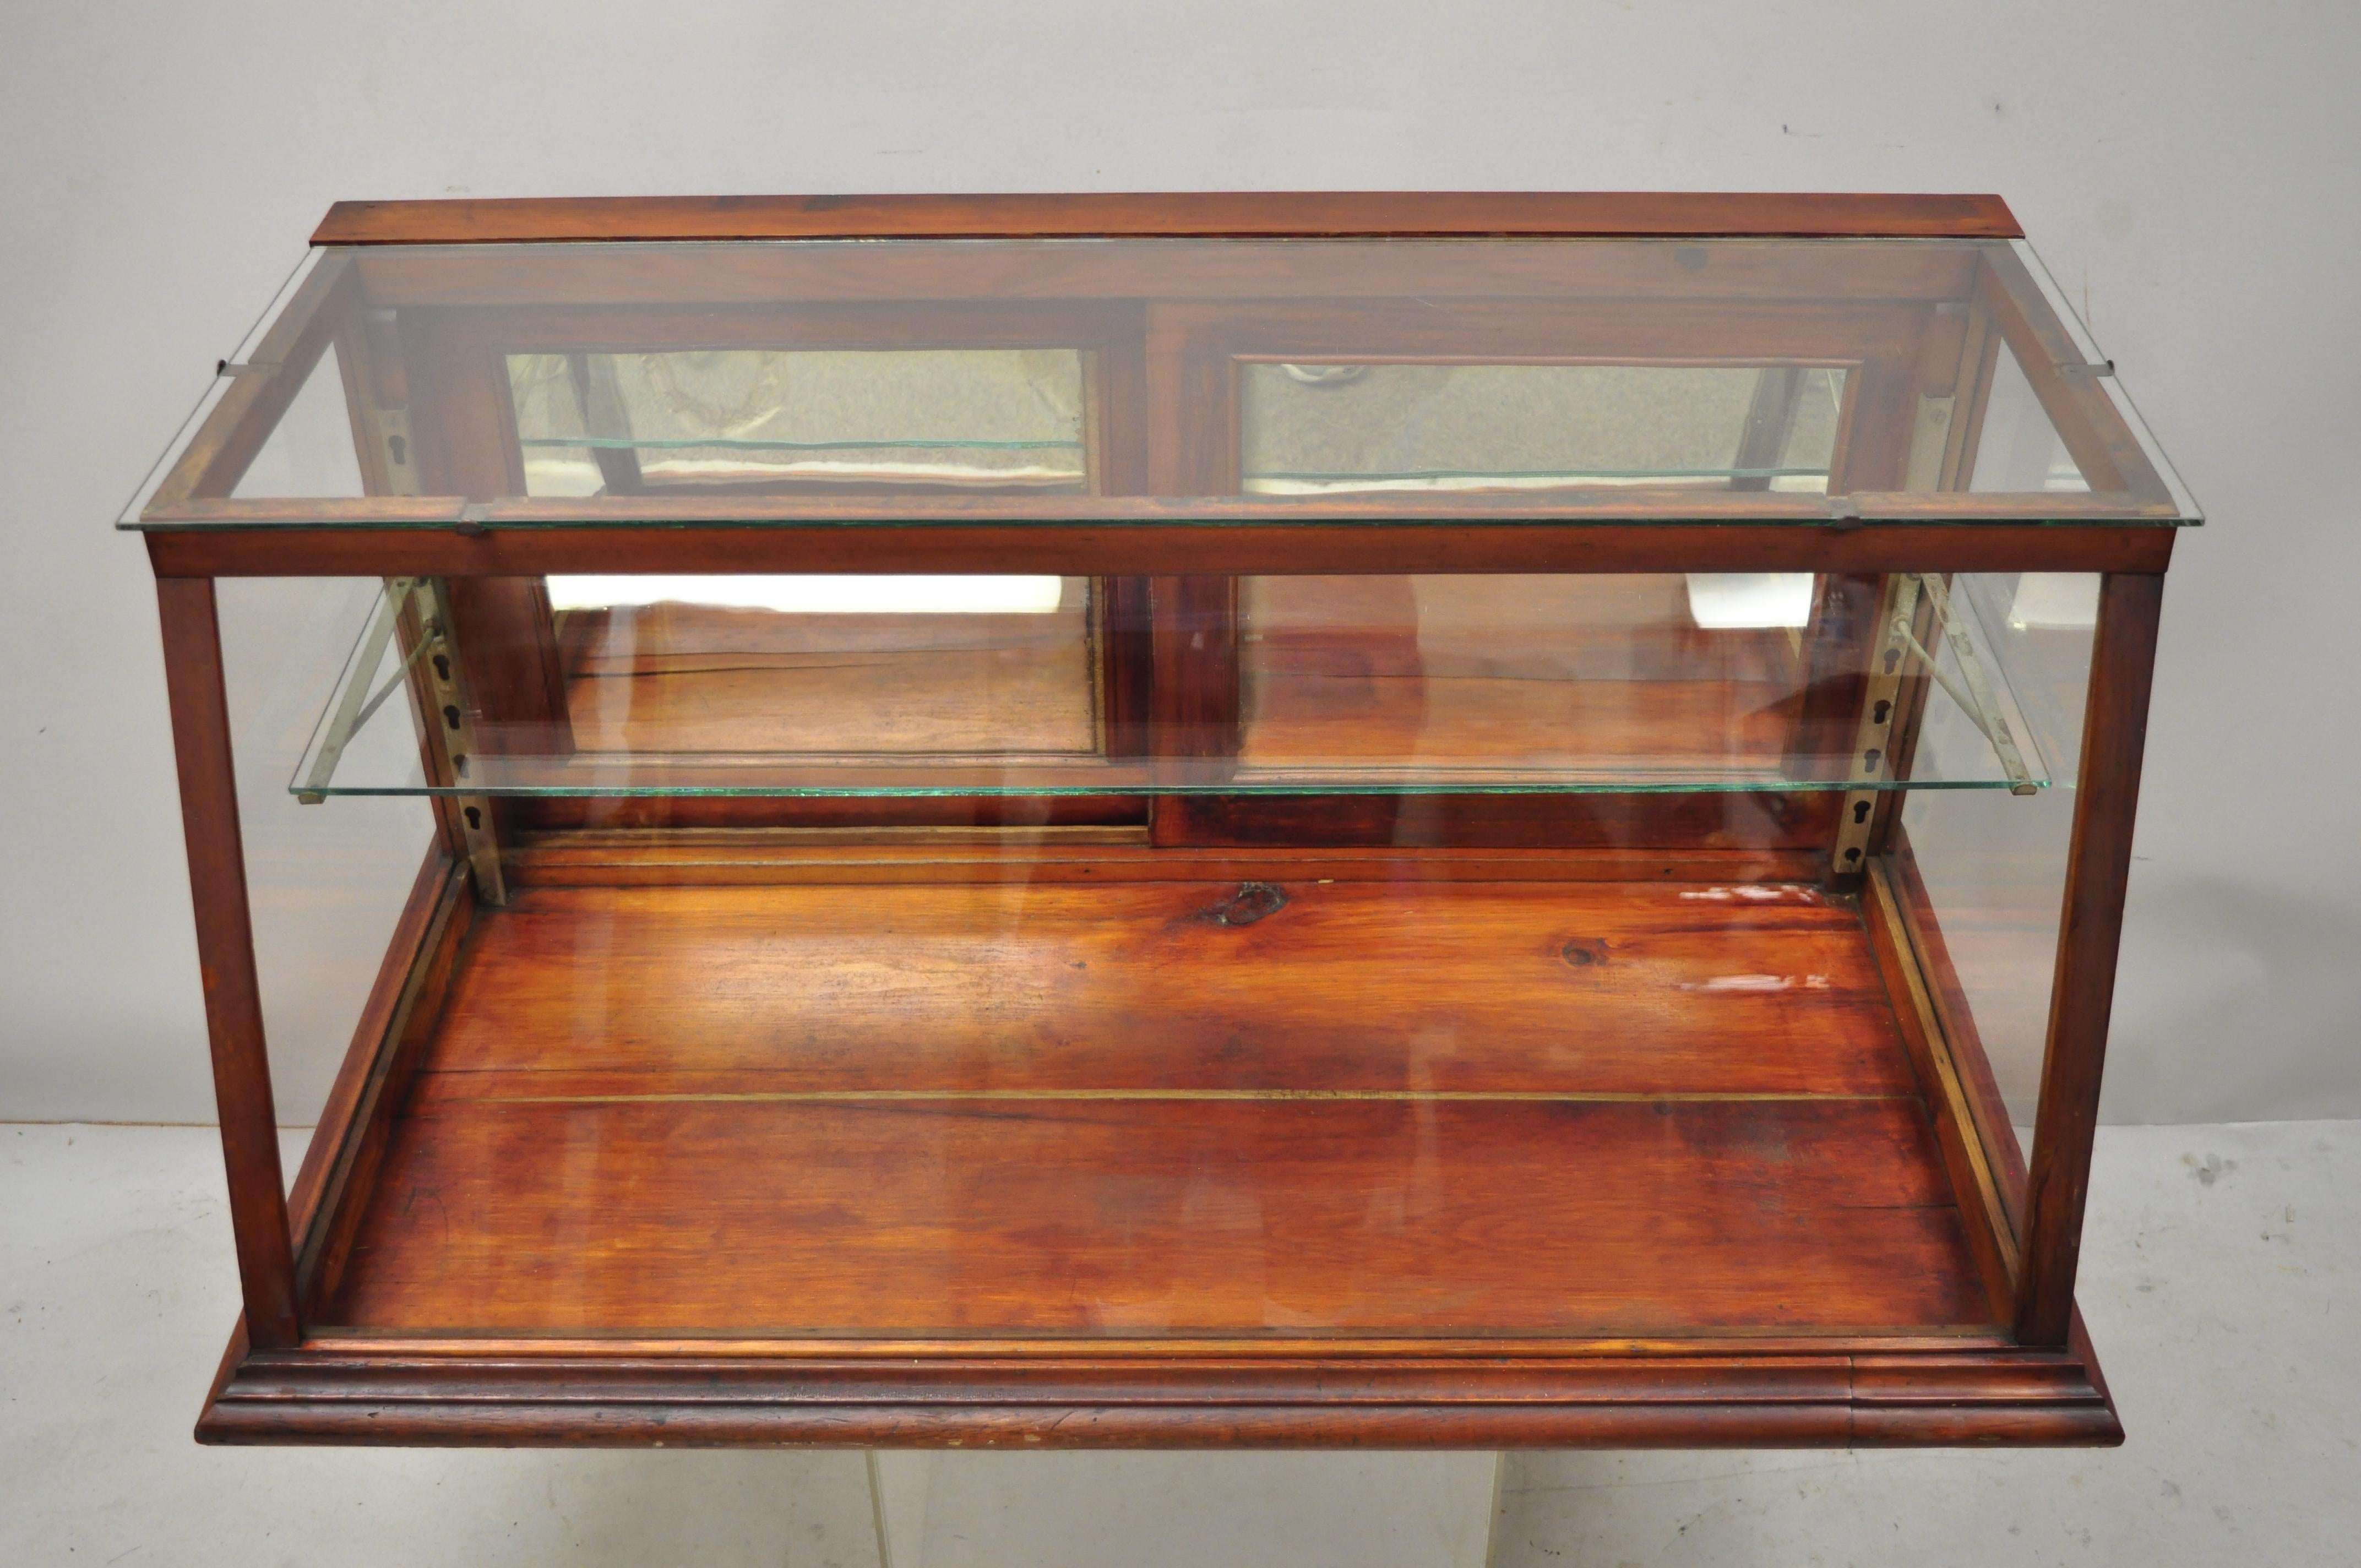 Antique Wood & Glass Angled Showcase Country Drug Store Counter Top Display Case 5